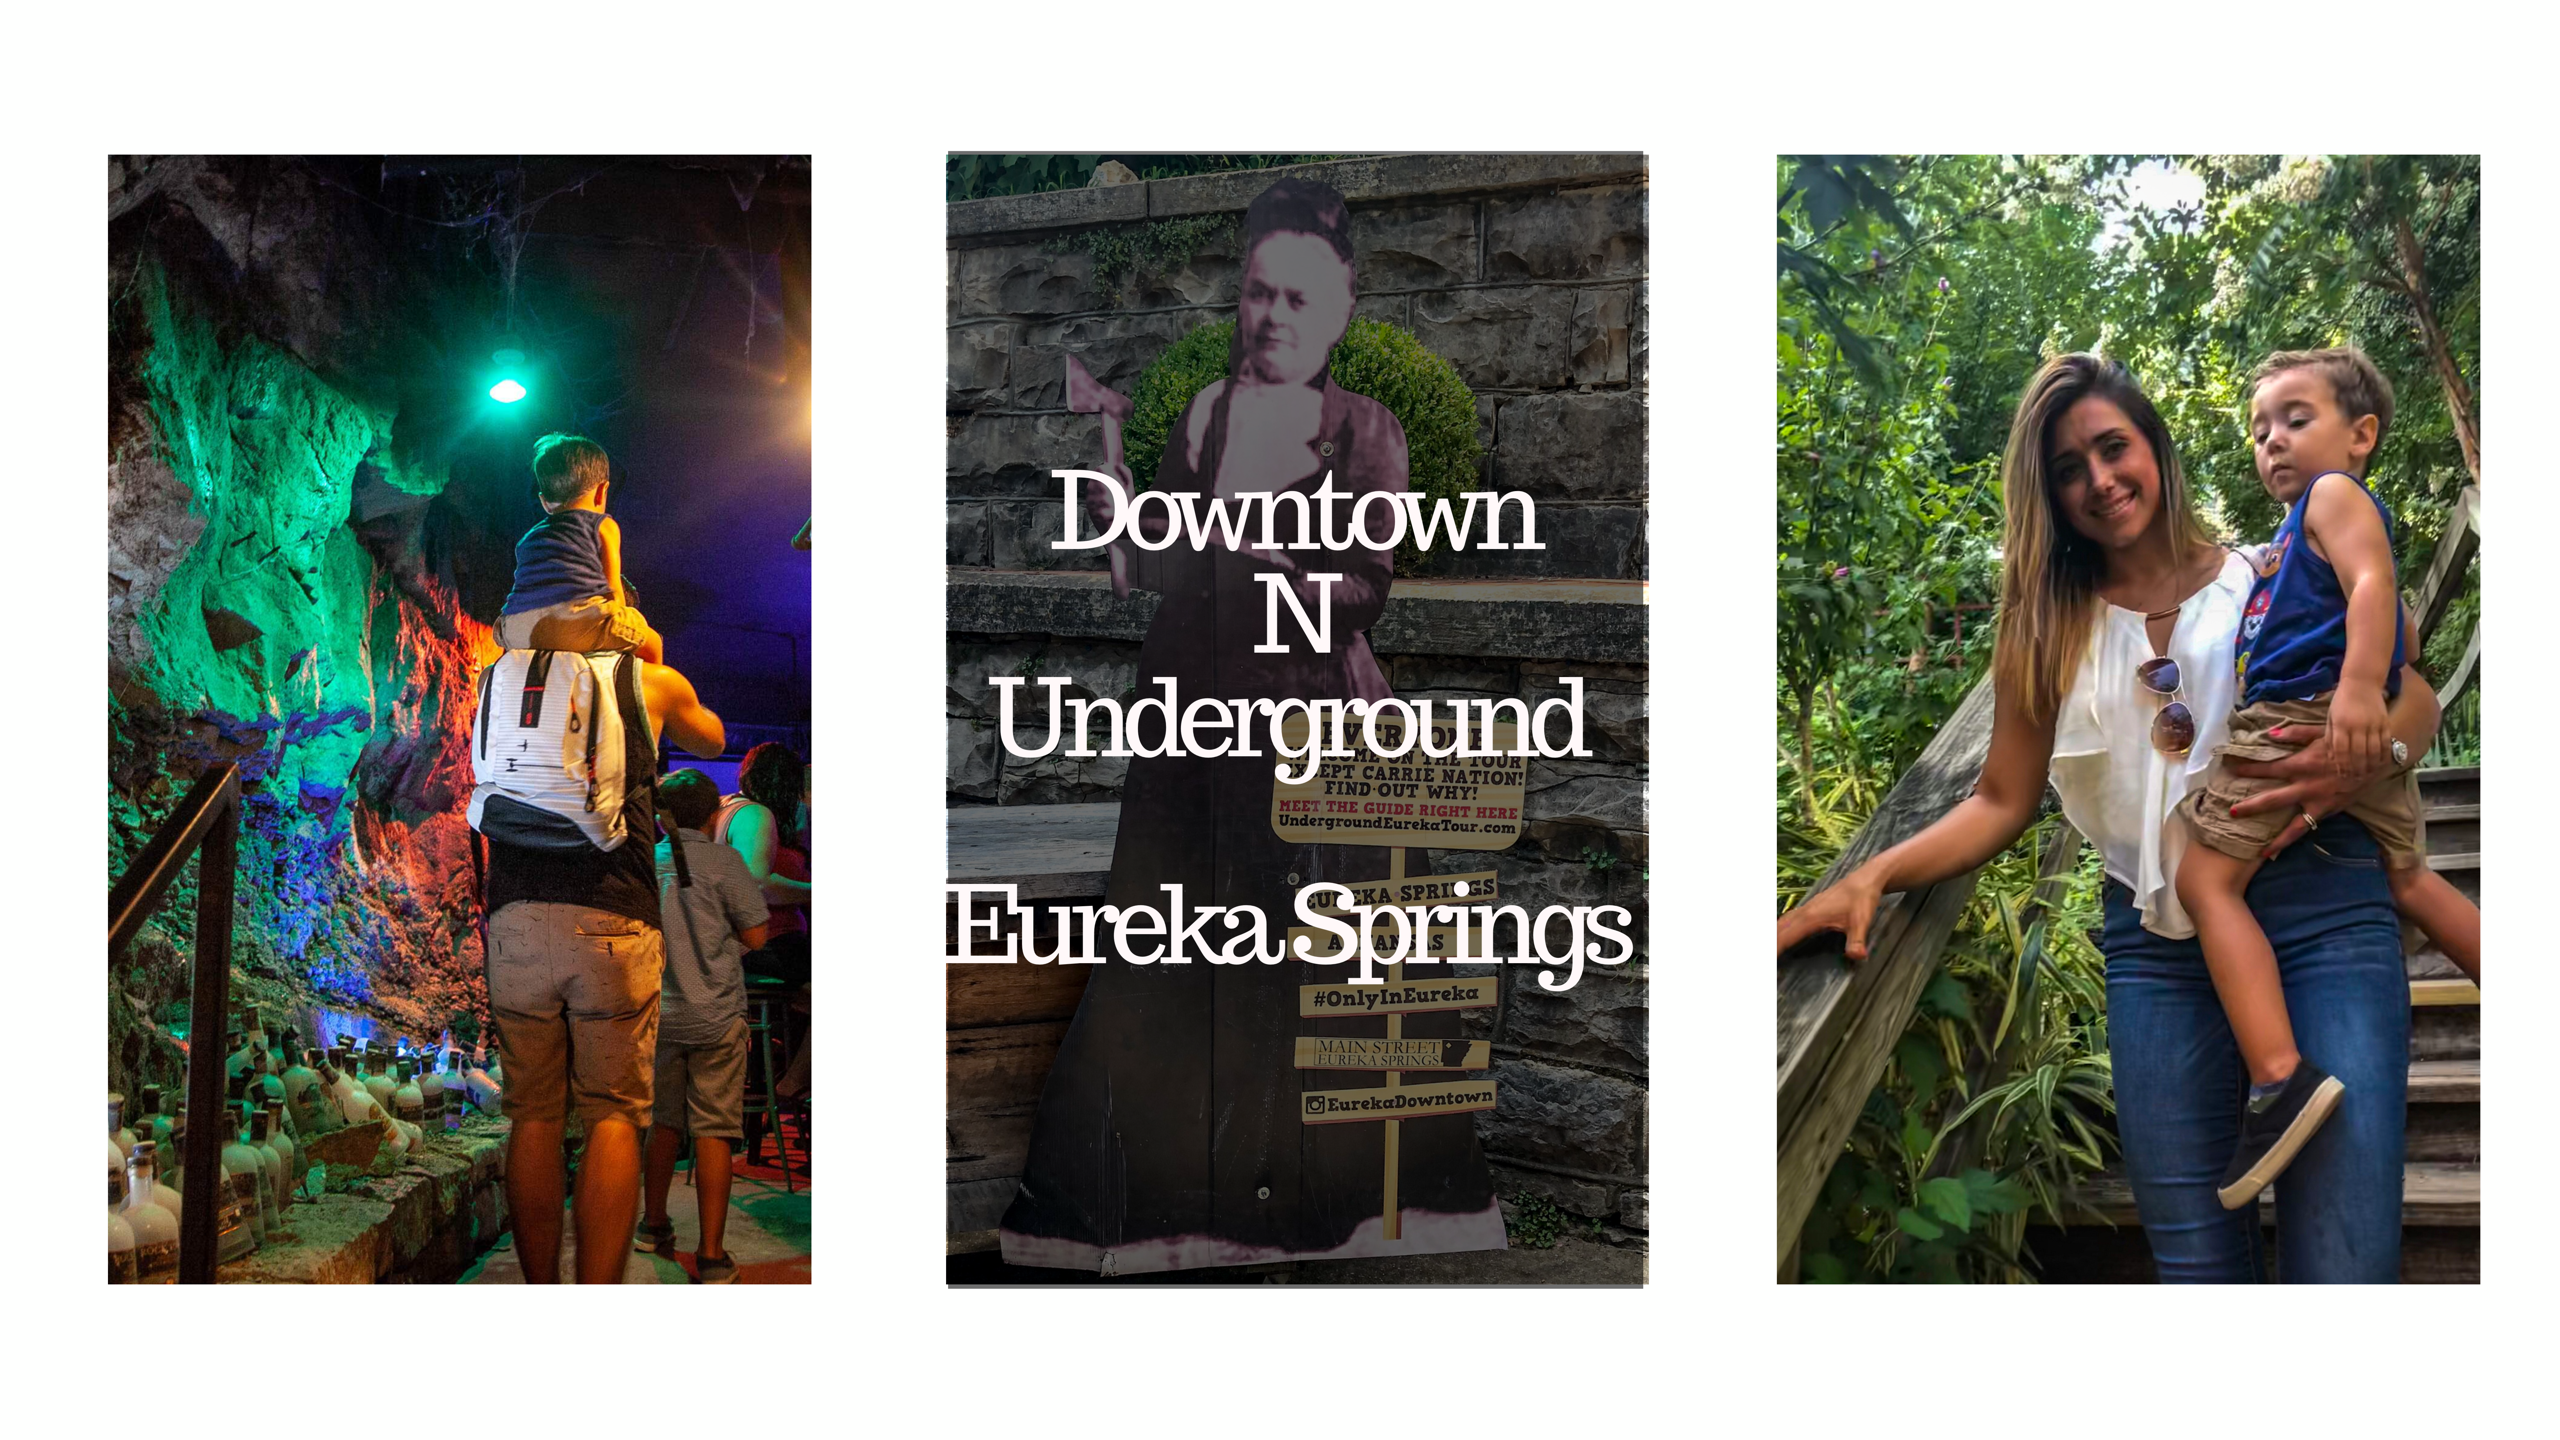 Eureka Springs Downtown N Underground Tour – Everything You Need to Know and 5 Tips for Bringing Kids